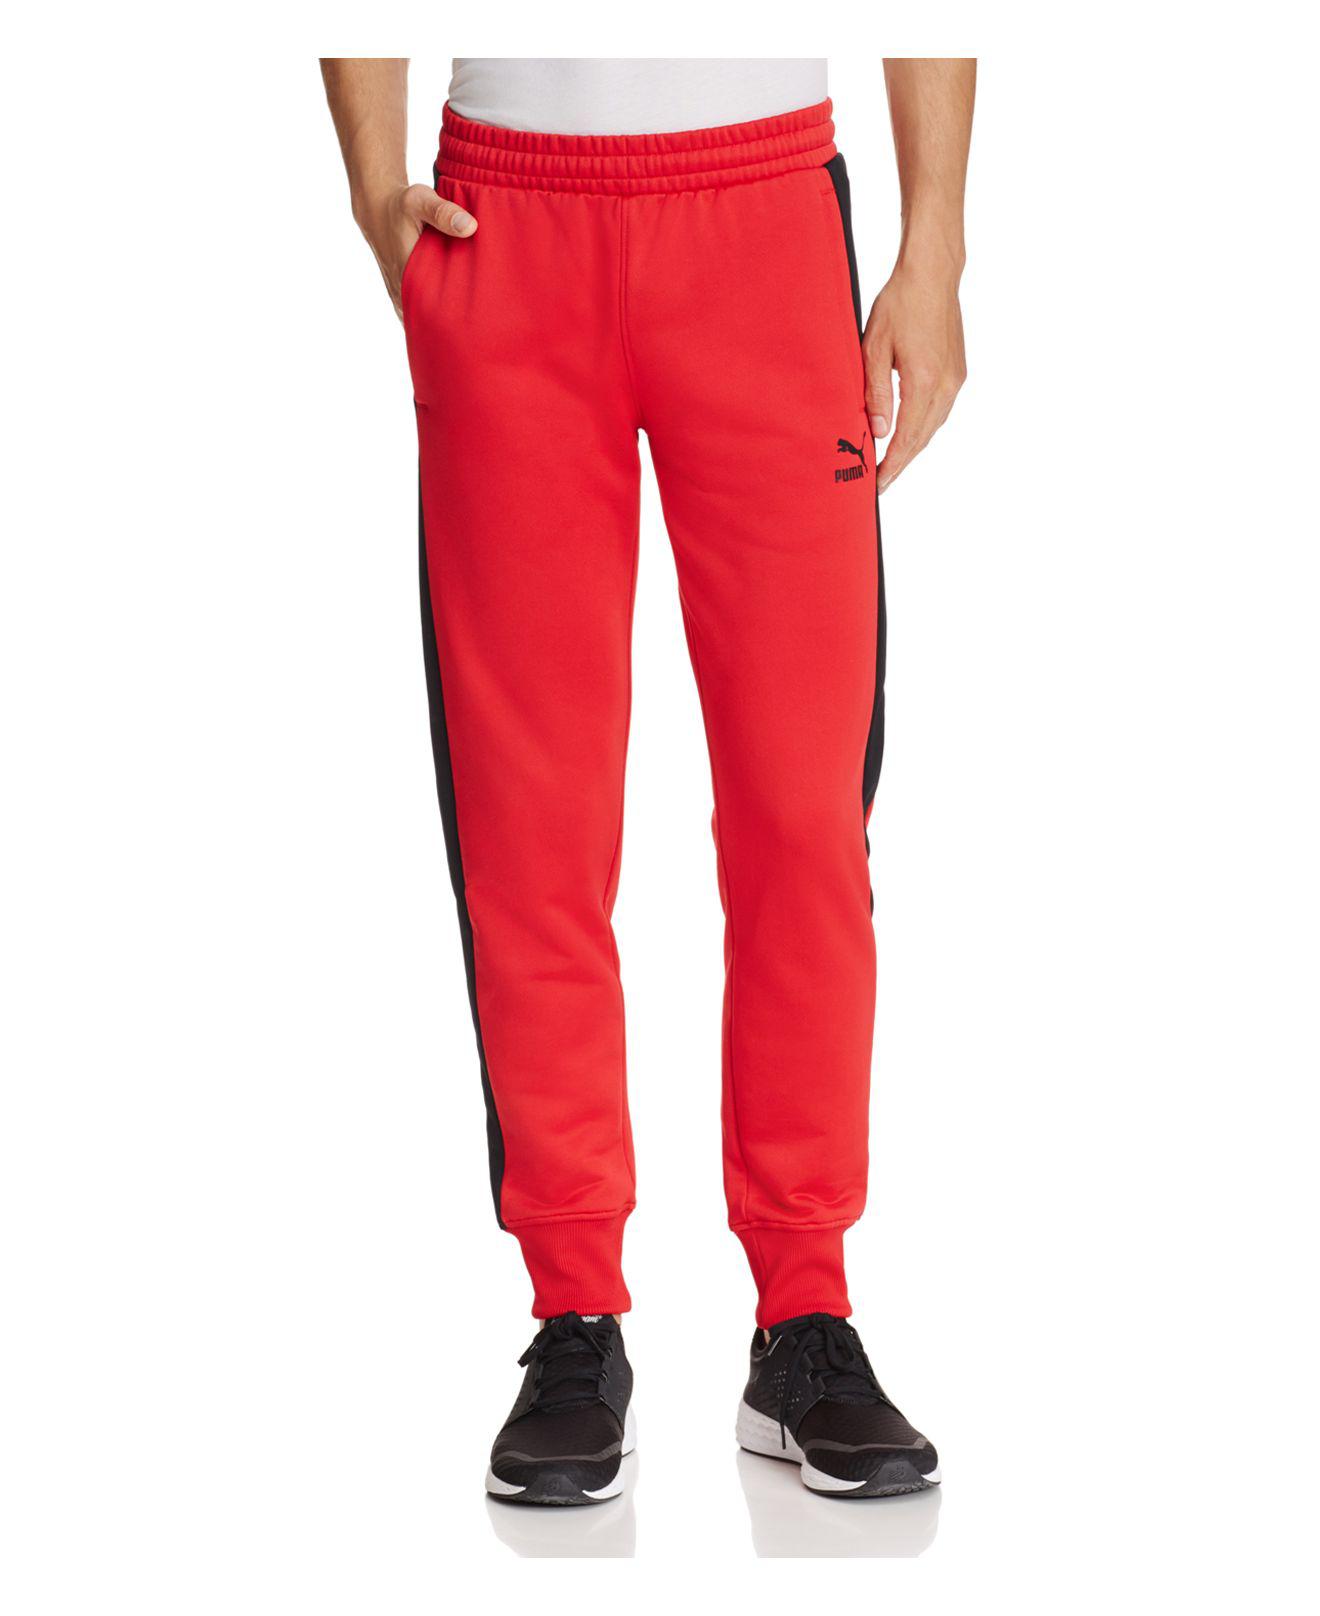 Lyst - Puma Archive T7 Track Pants in Red for Men